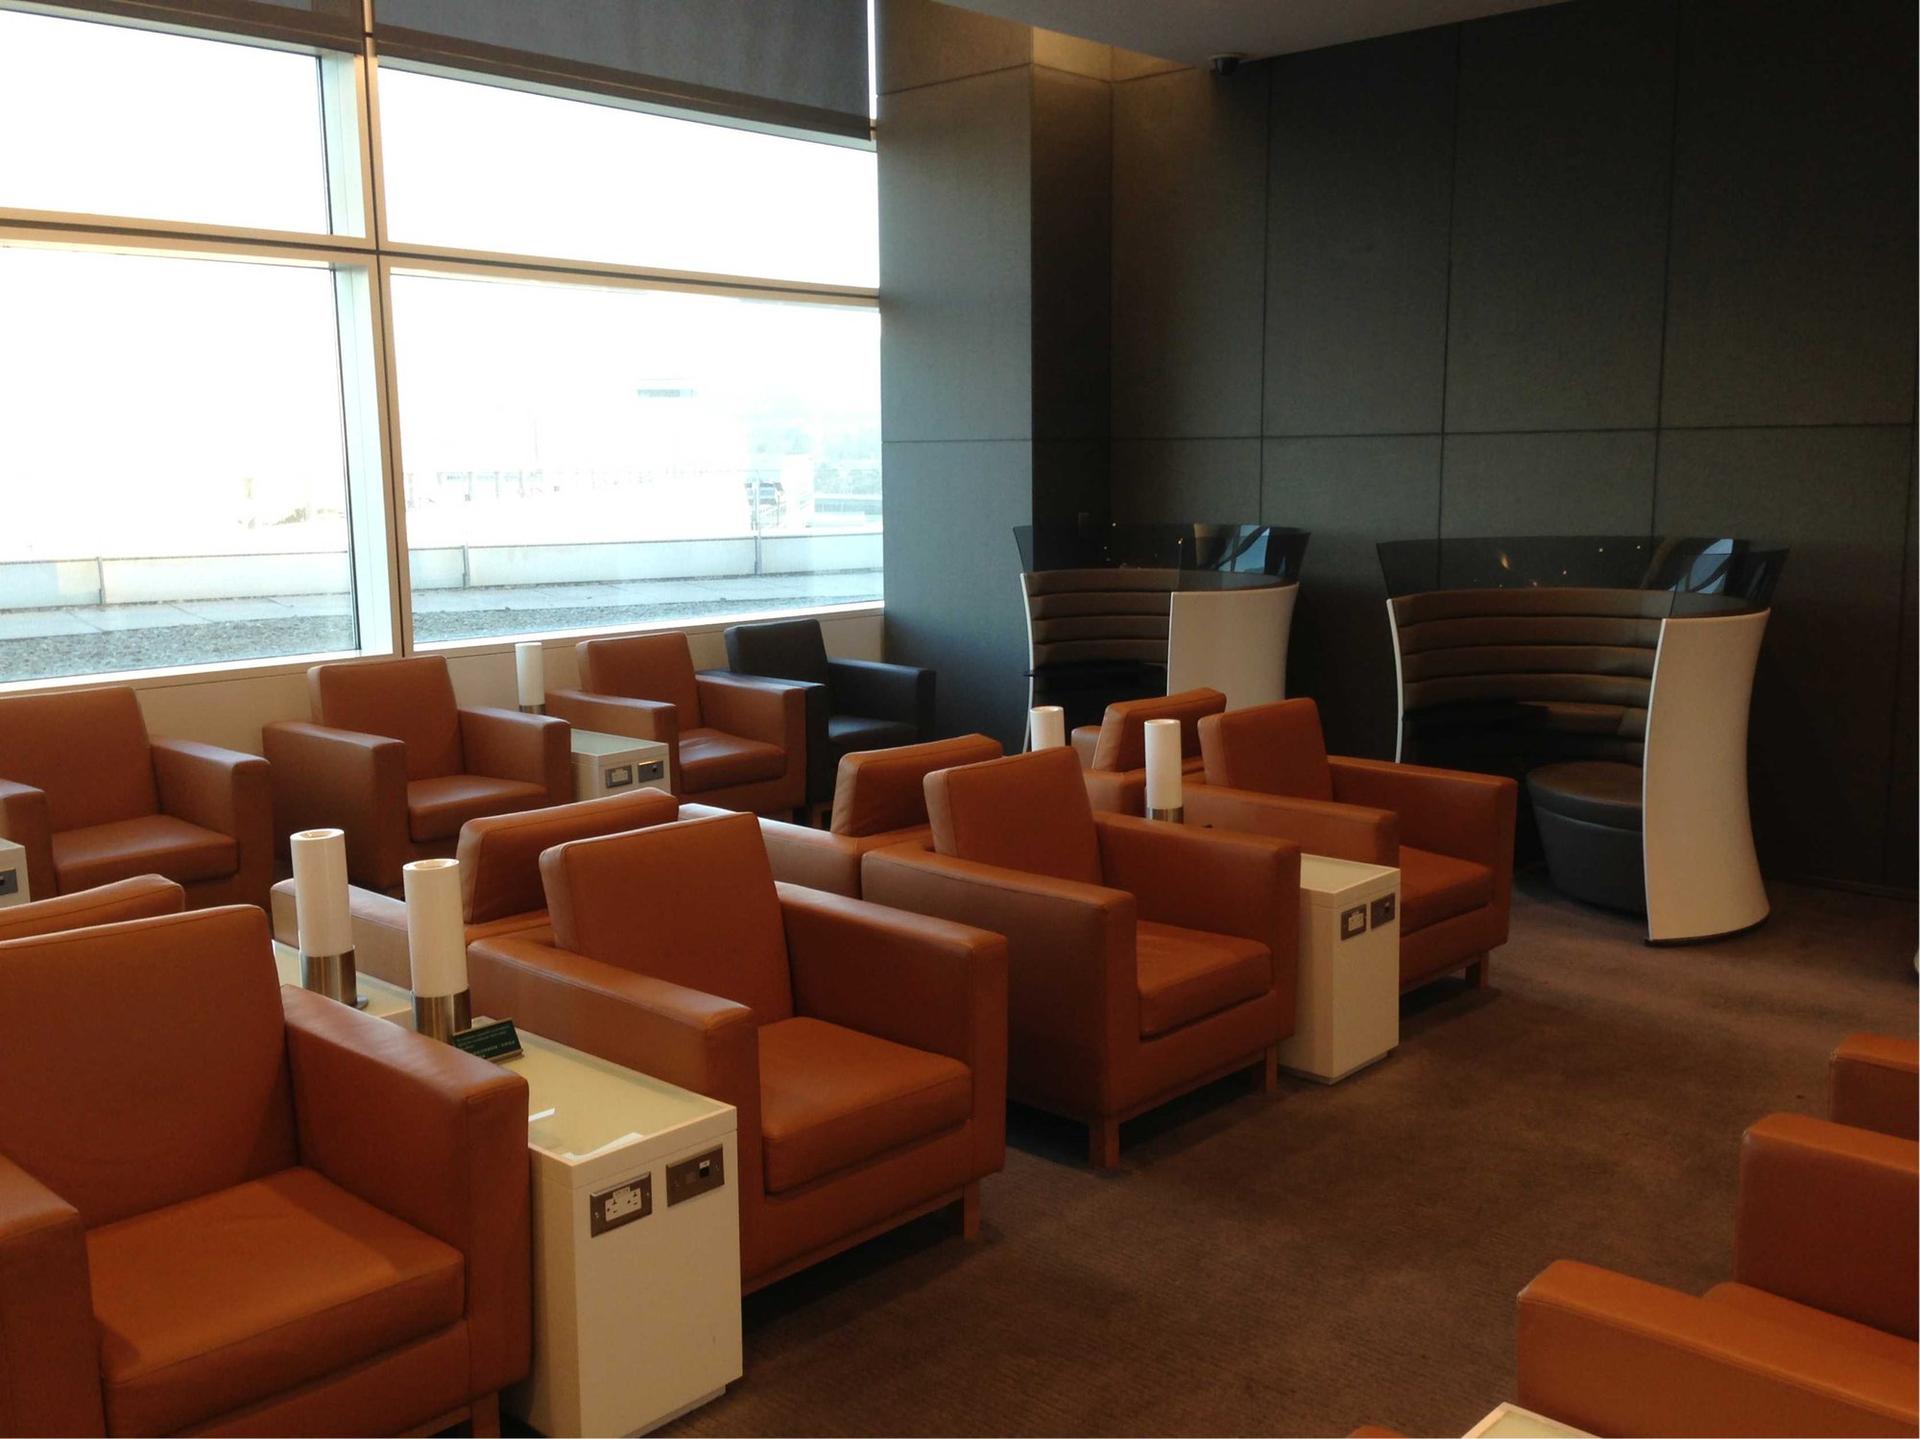 Cathay Pacific First and Business Class Lounge image 8 of 74